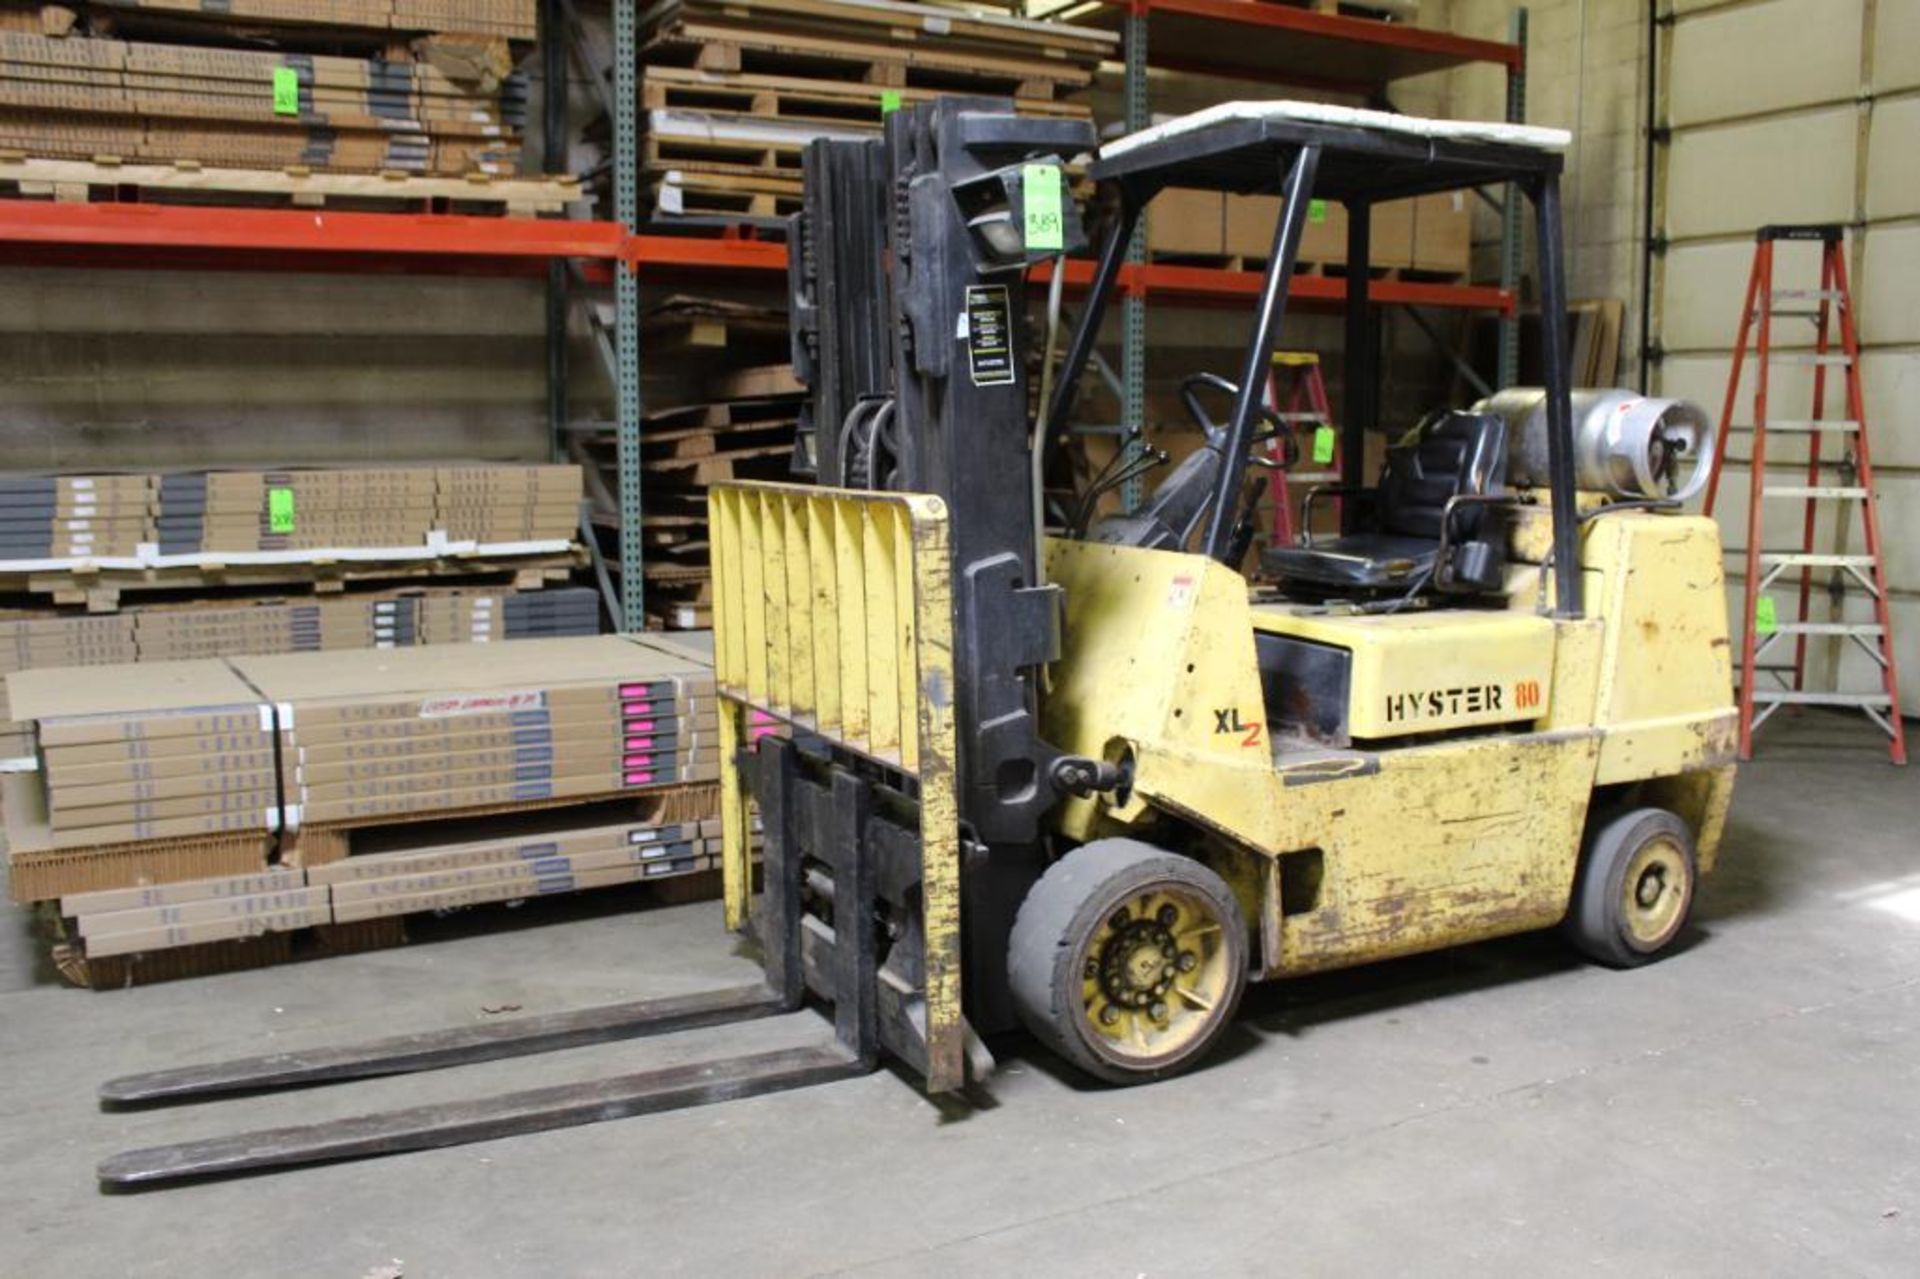 Hyster XL2 Forklift Model S80XL 8,000LB Capacity - Image 2 of 18